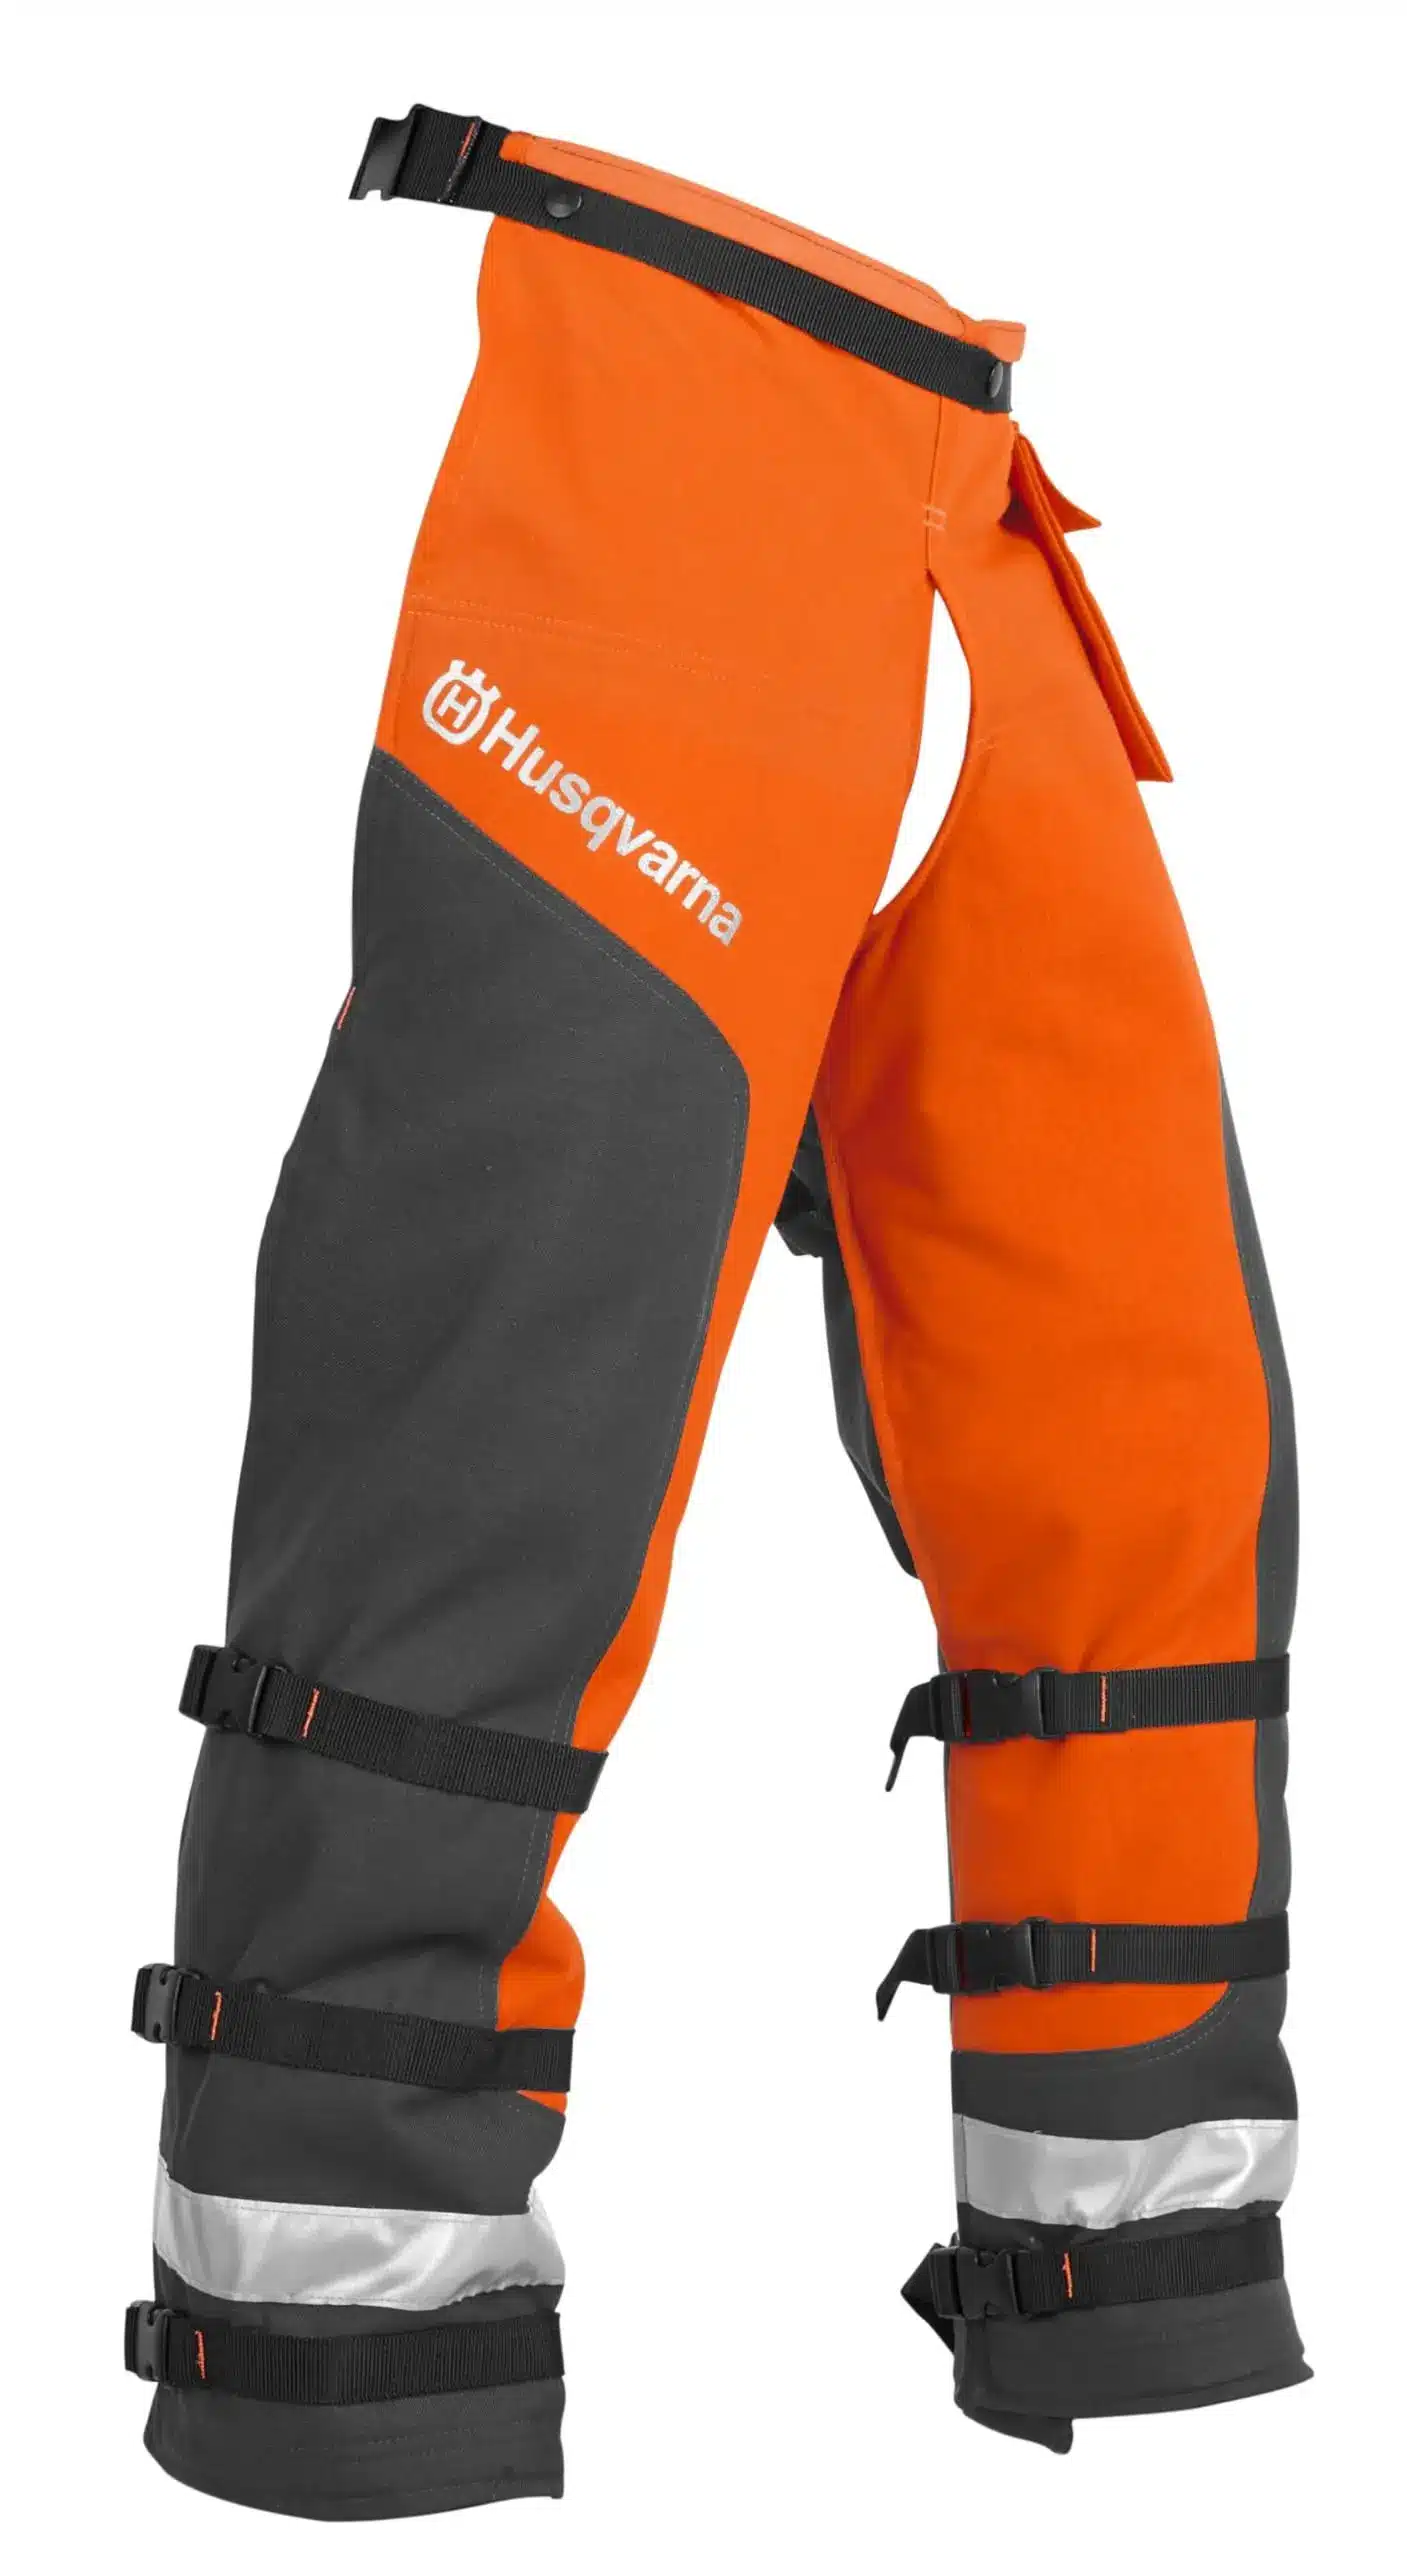 5 best chainsaw pants: essential safety and comfort guide